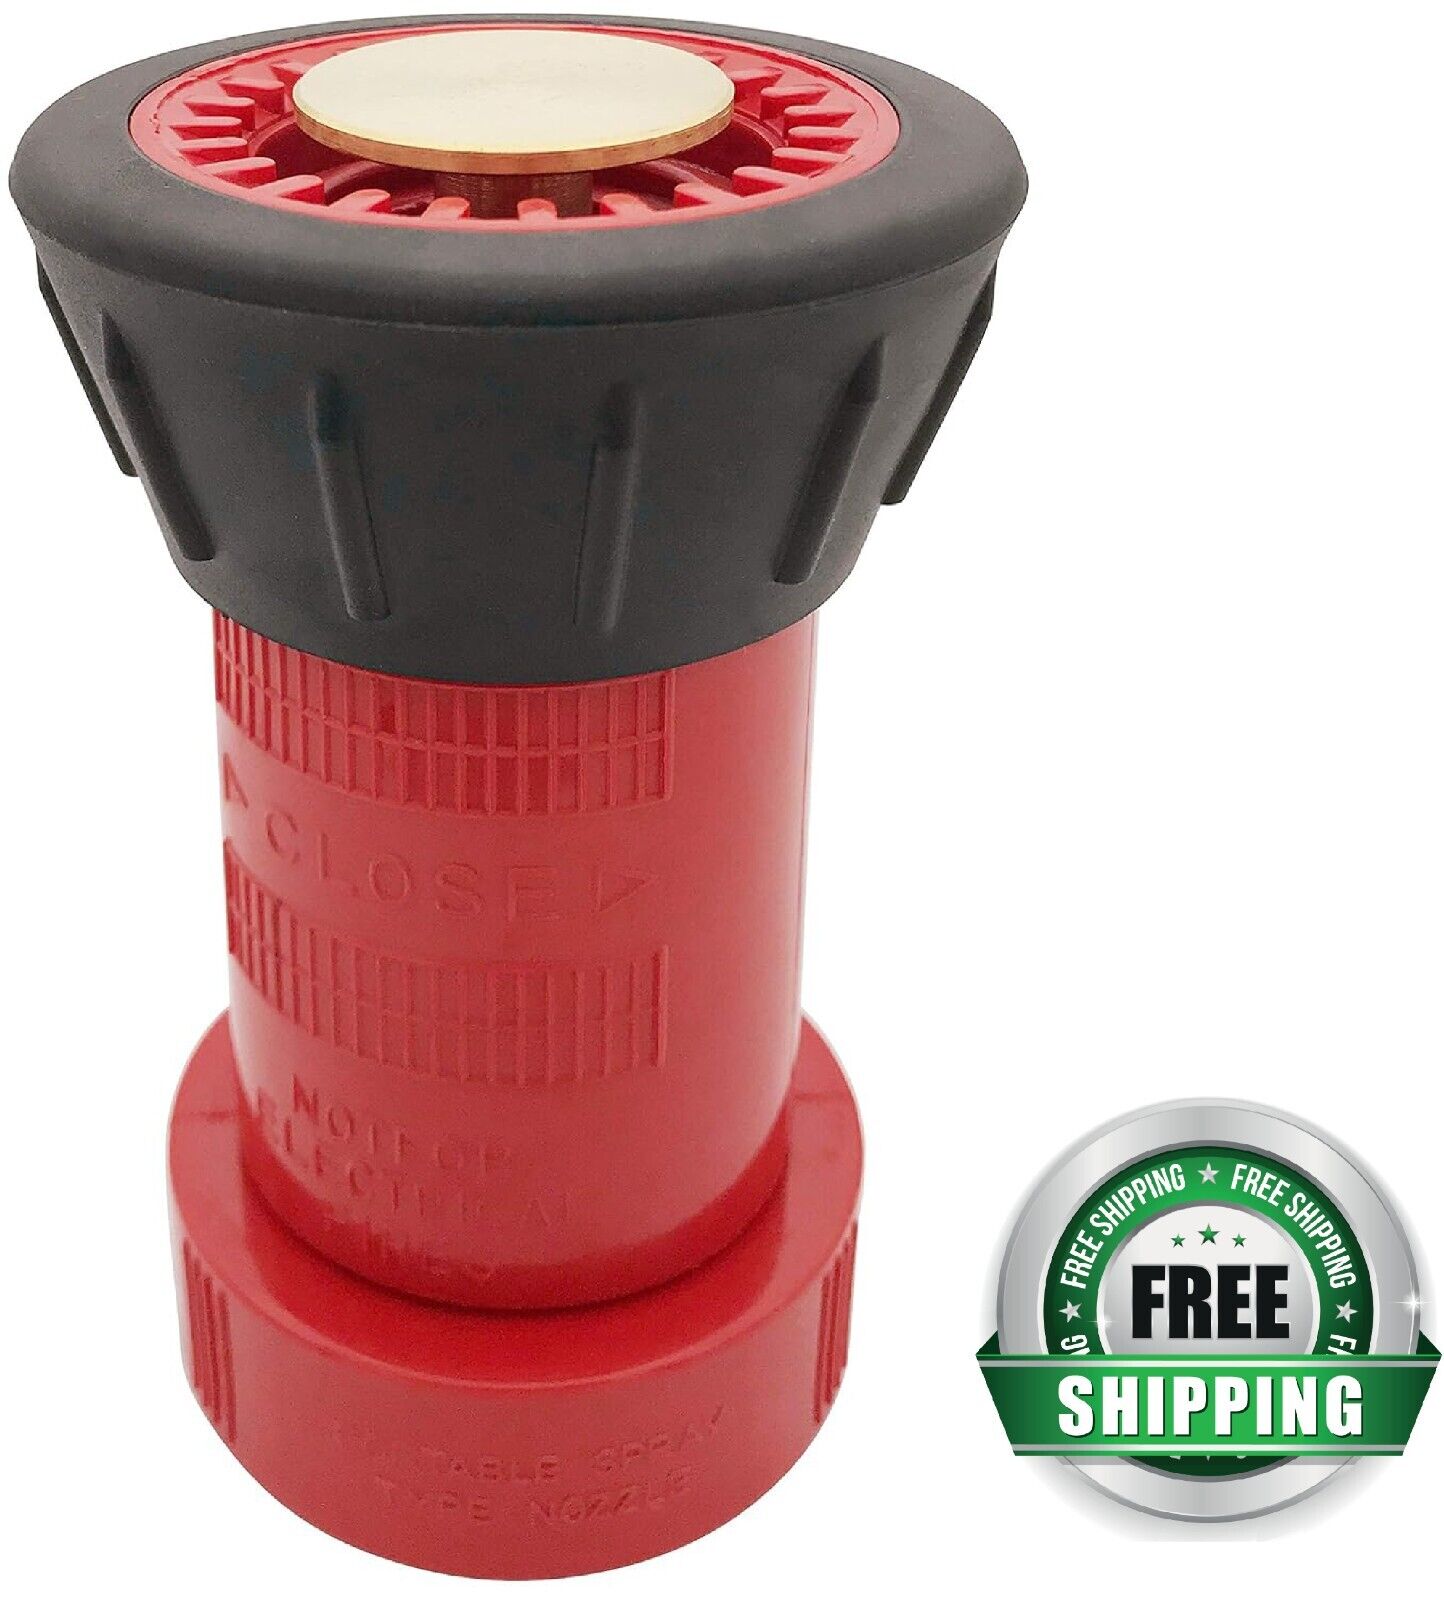 RosyOcean Fire Hose Nozzle 1-1/2 Inch NST / NH Thermoplastic Fire Equipment NEW